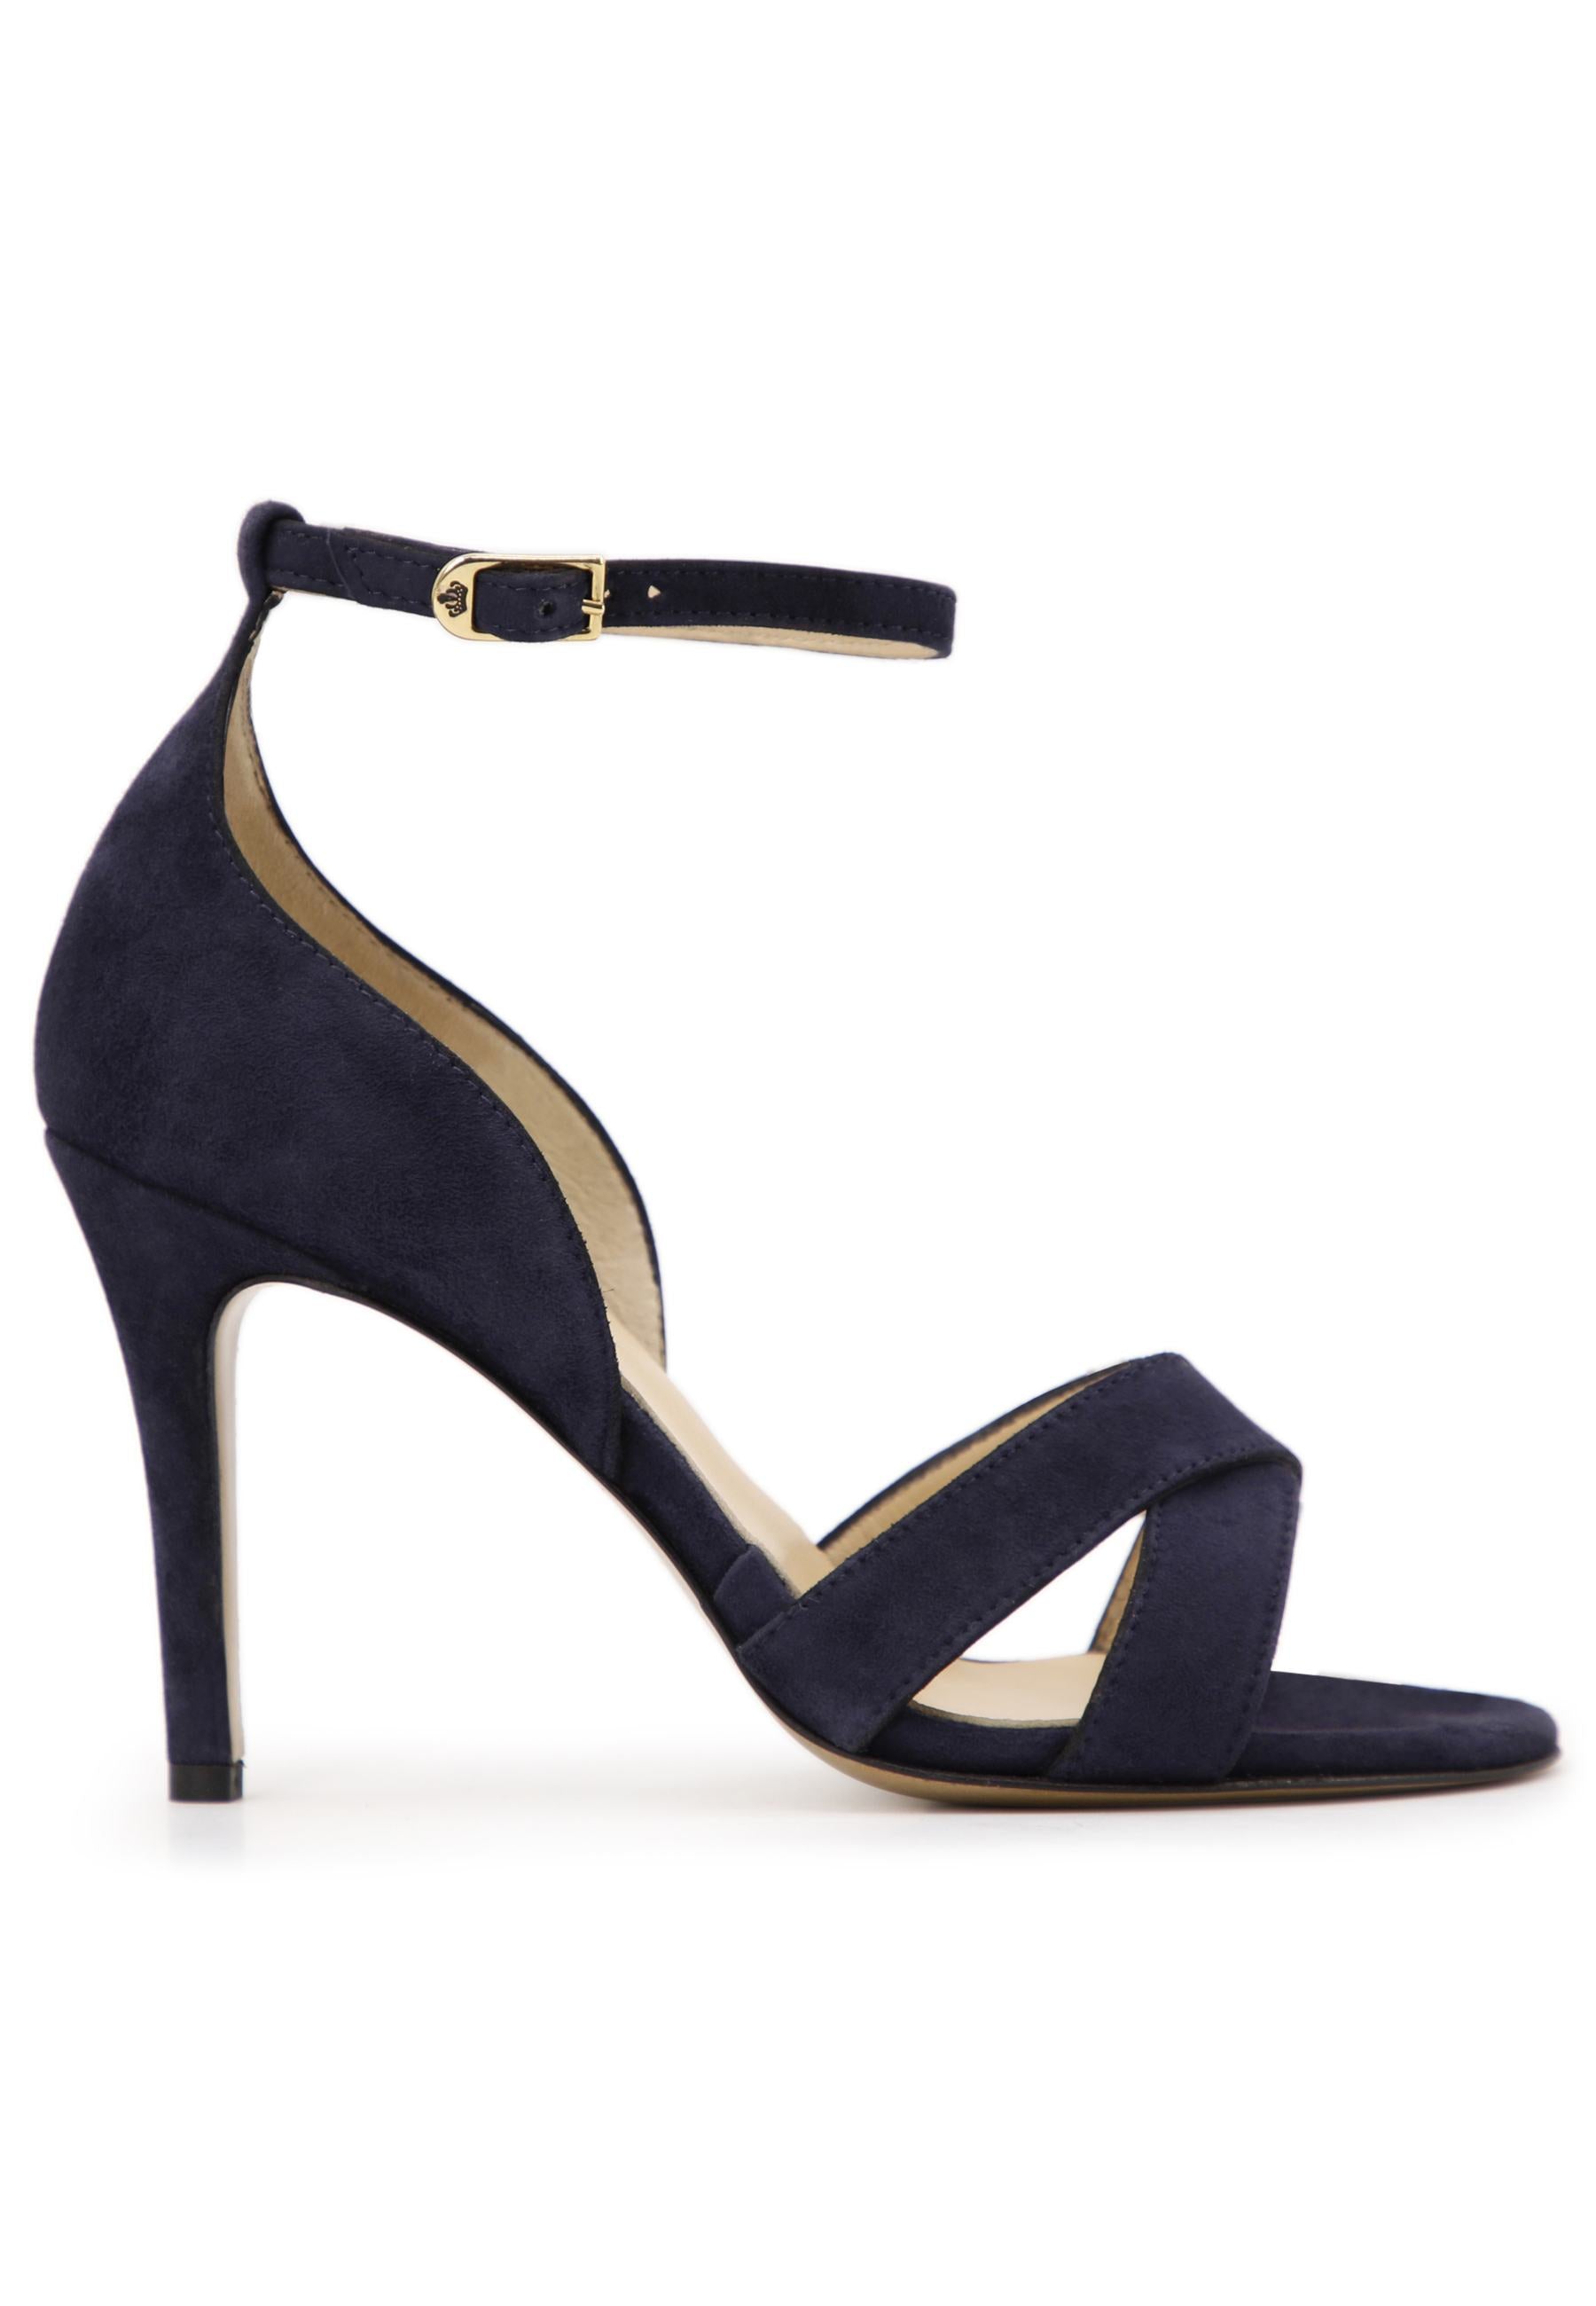 Women's blue suede sandals with high heel and ankle strap